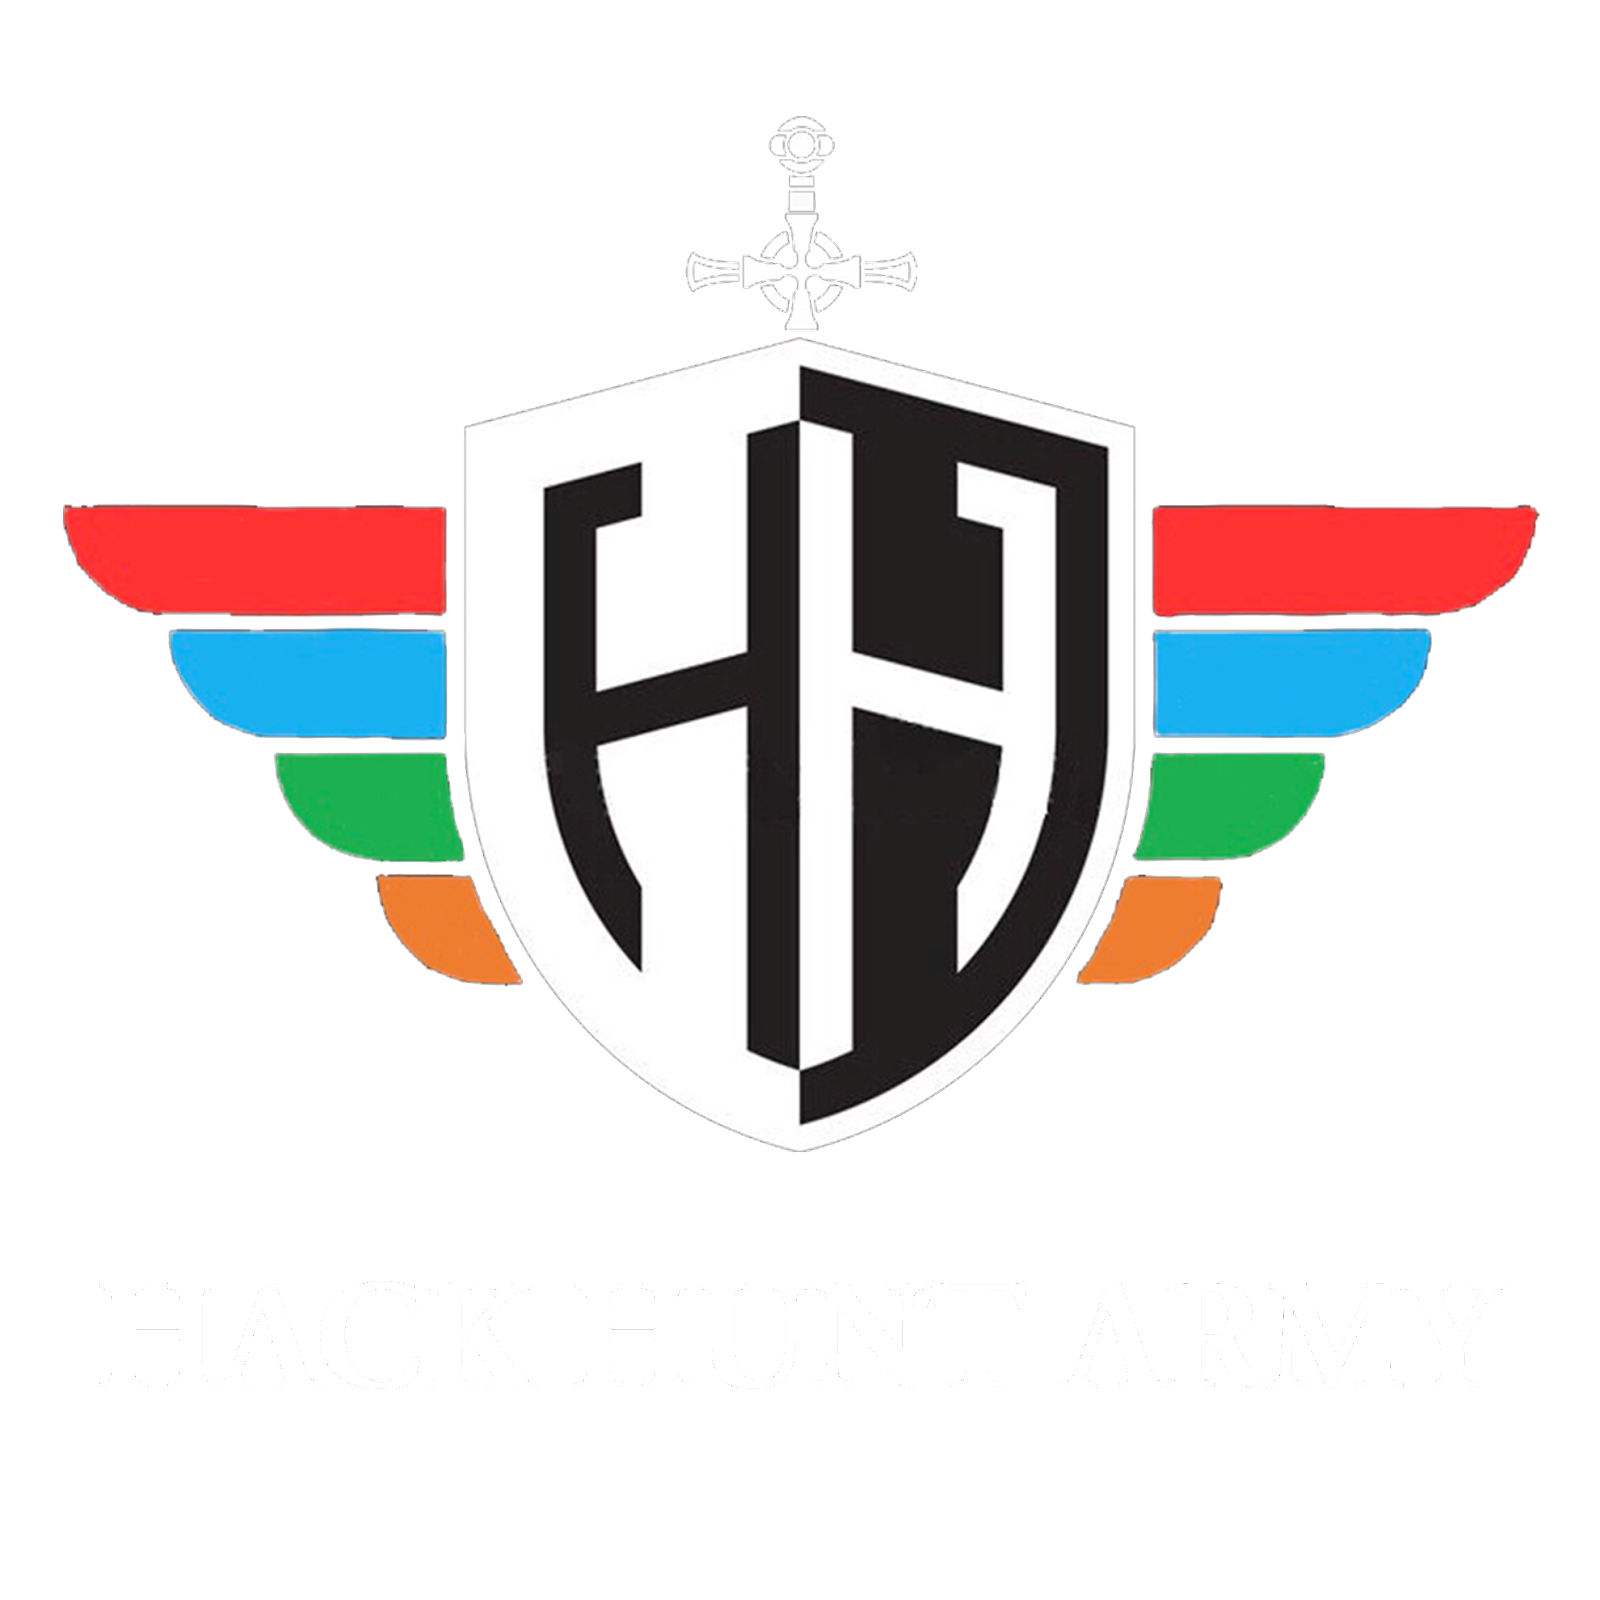 Hack Hunt's Army